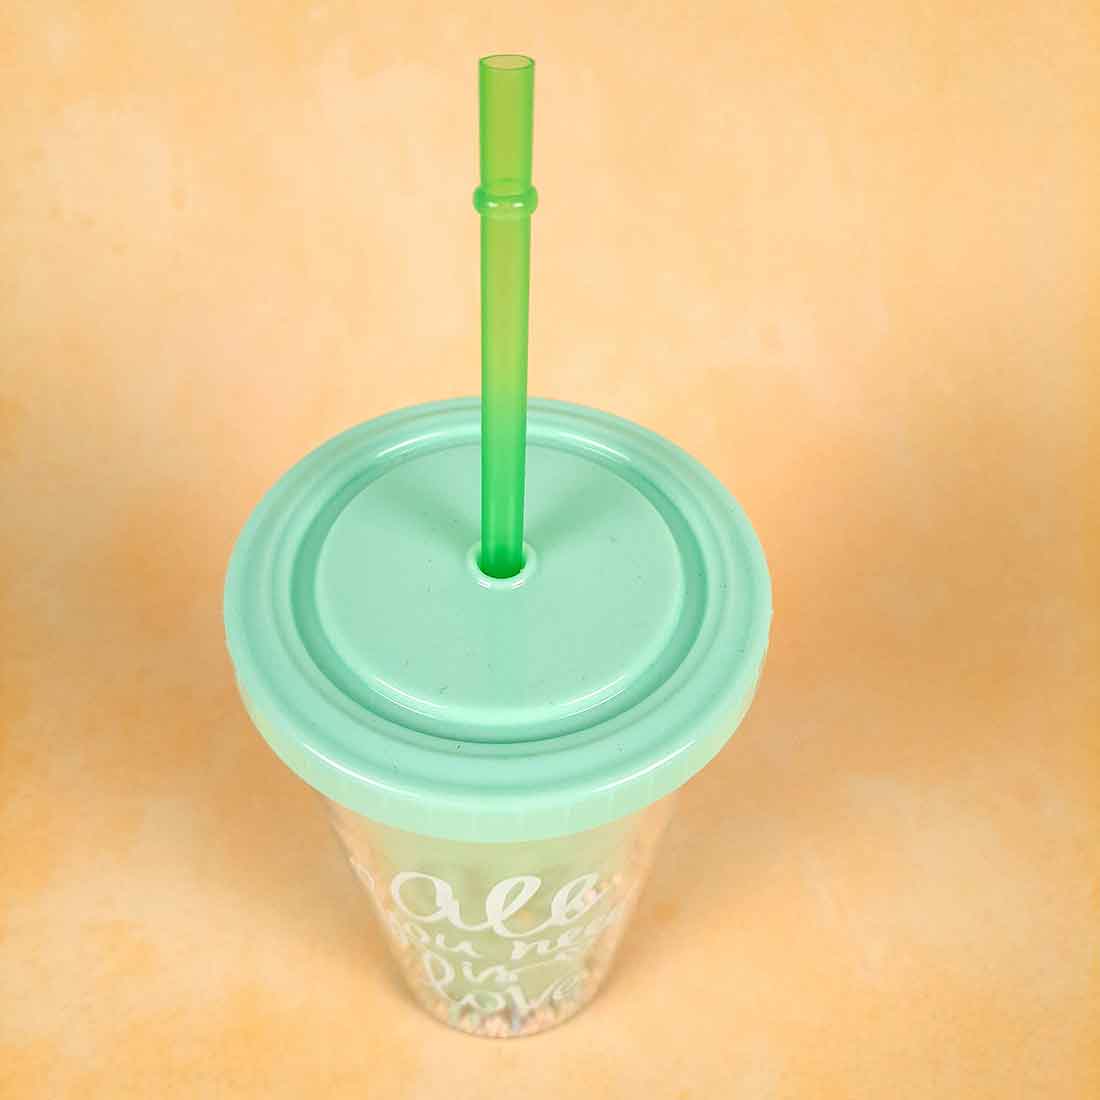 Glass Sipper/Tumbler With Straw and Lid - 6 Inch - ApkaMart